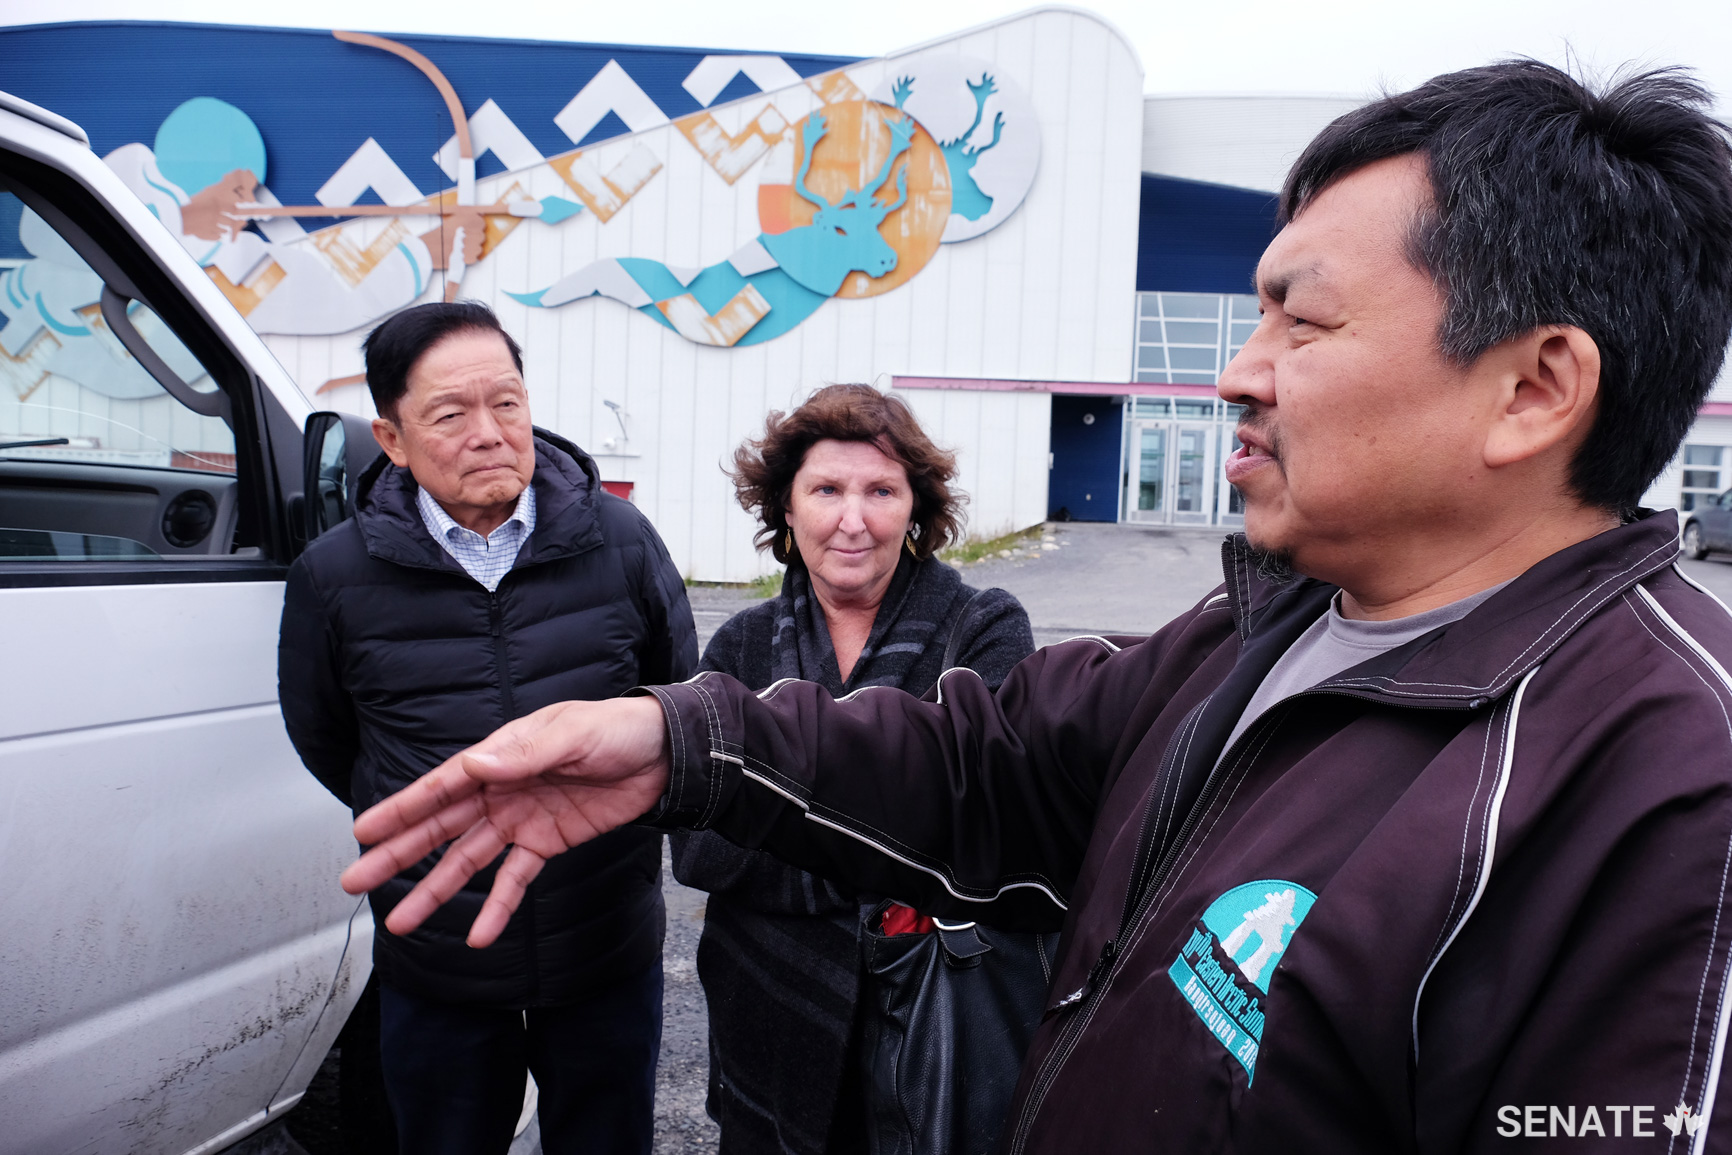 Kuujjuaq Mayor Tunu Napartuk, right, tells senators Victor Oh and Mary Coyle about inadequate housing in his hamlet. Homes are often overcrowded with multiple generations of family members living in the same dwelling. The lack of adequate housing was a recurring theme raised by northerners throughout their meetings with the committee.